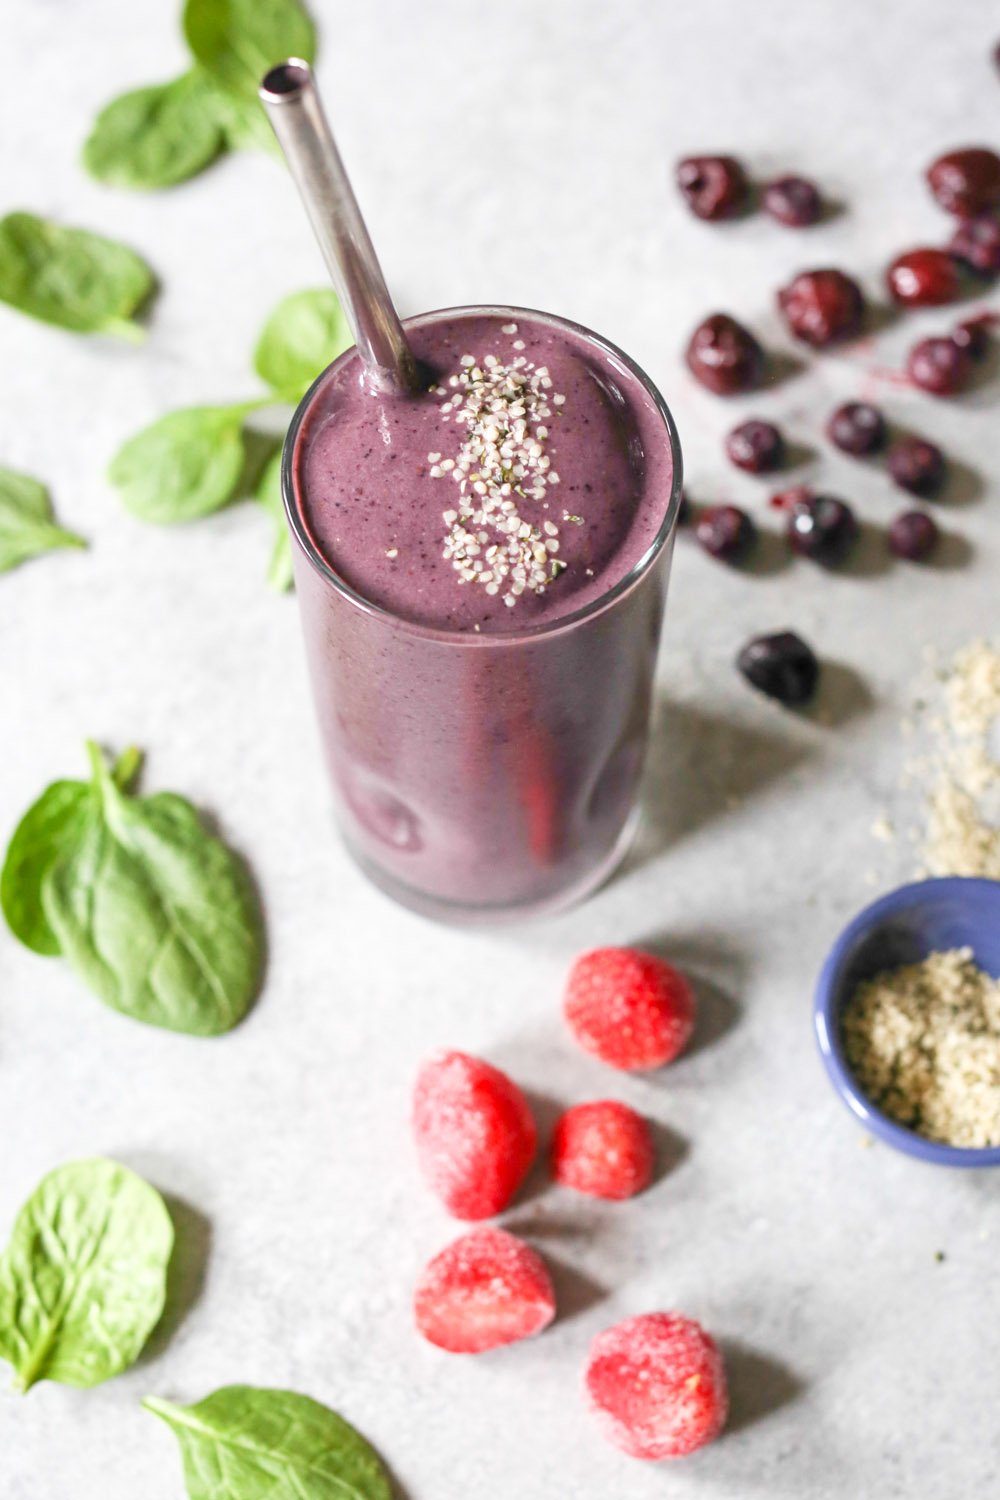 Purple berry cherry smoothie in a glass with a metal straw surrounded by spinach leaves, berries, and bowl of seeds.